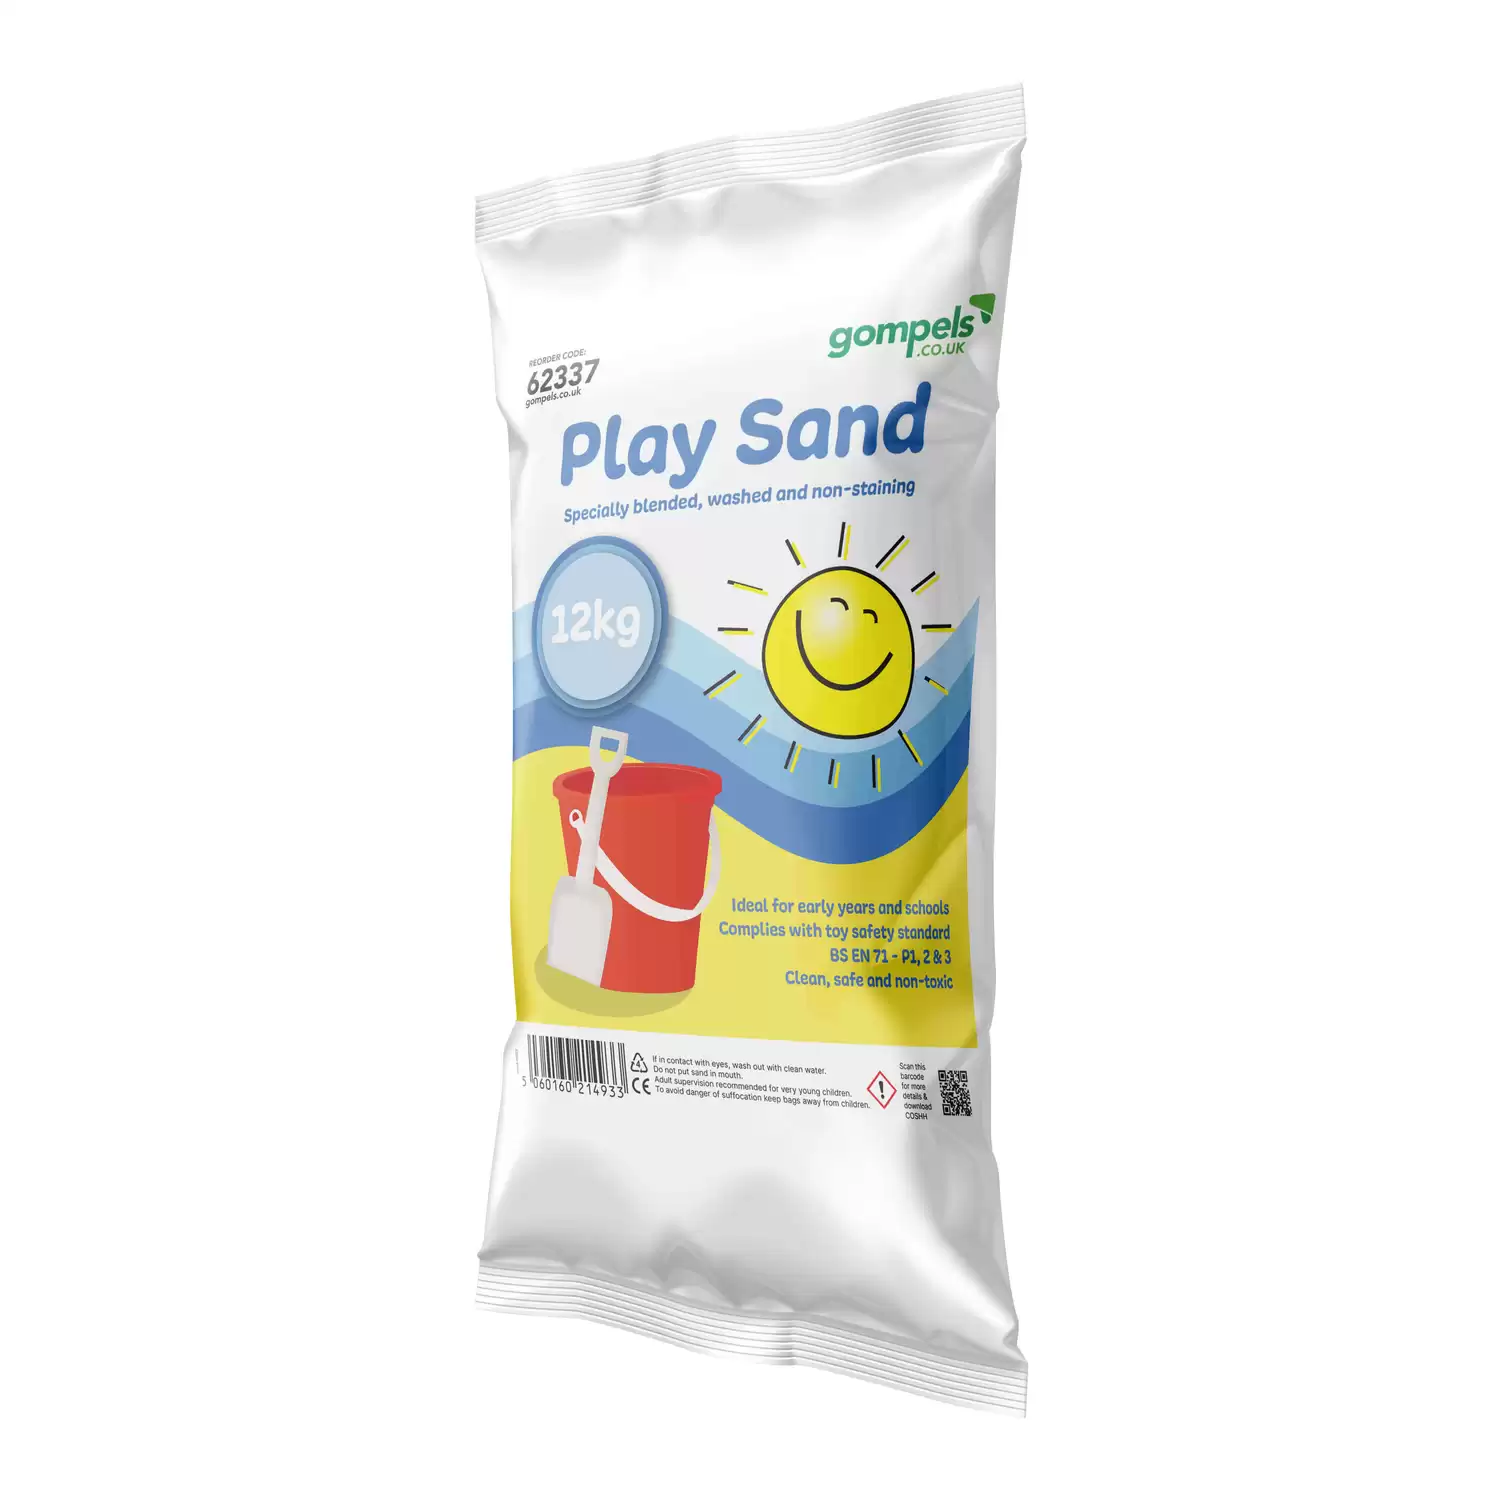 Play Sand 12kg - Gompels - Care & Nursery Supply Specialists